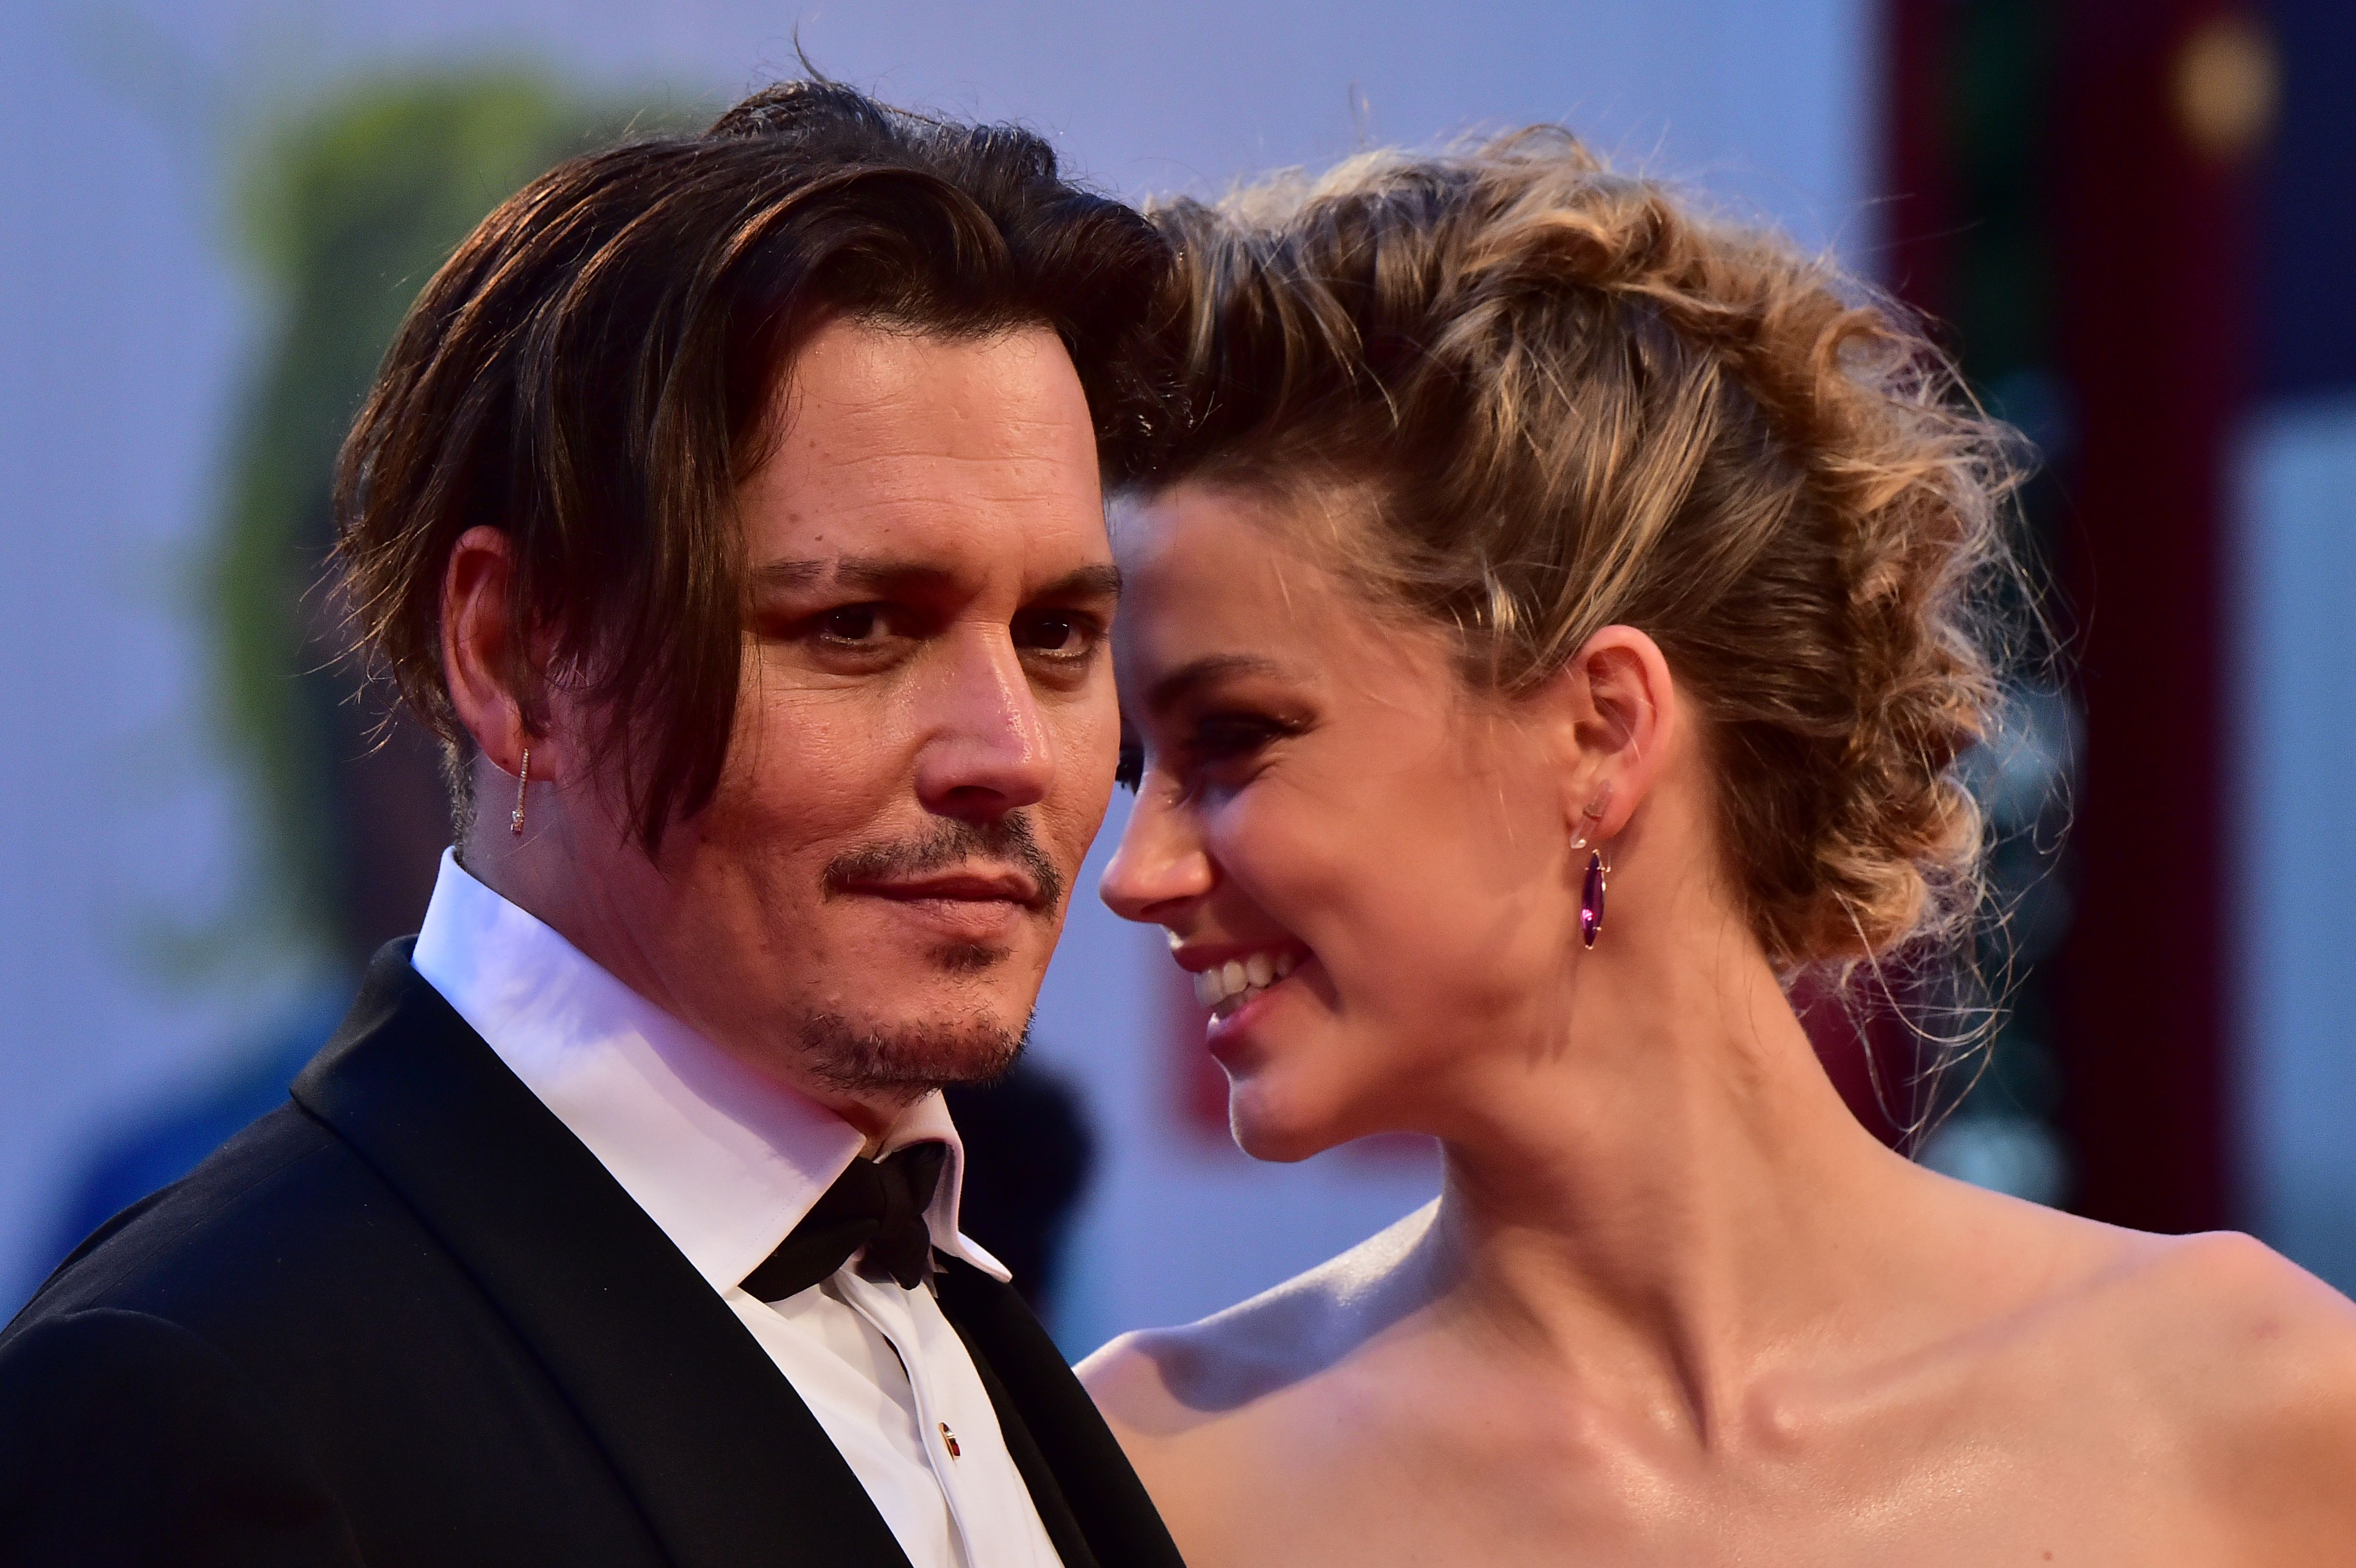  Amber Heard arrives with Johnny Depp for the screening of the movie "The Danish Girl" presented in competition at the 72nd Venice International Film Festival on September 5, 2015 at Venice Lido. | Source: Getty Images